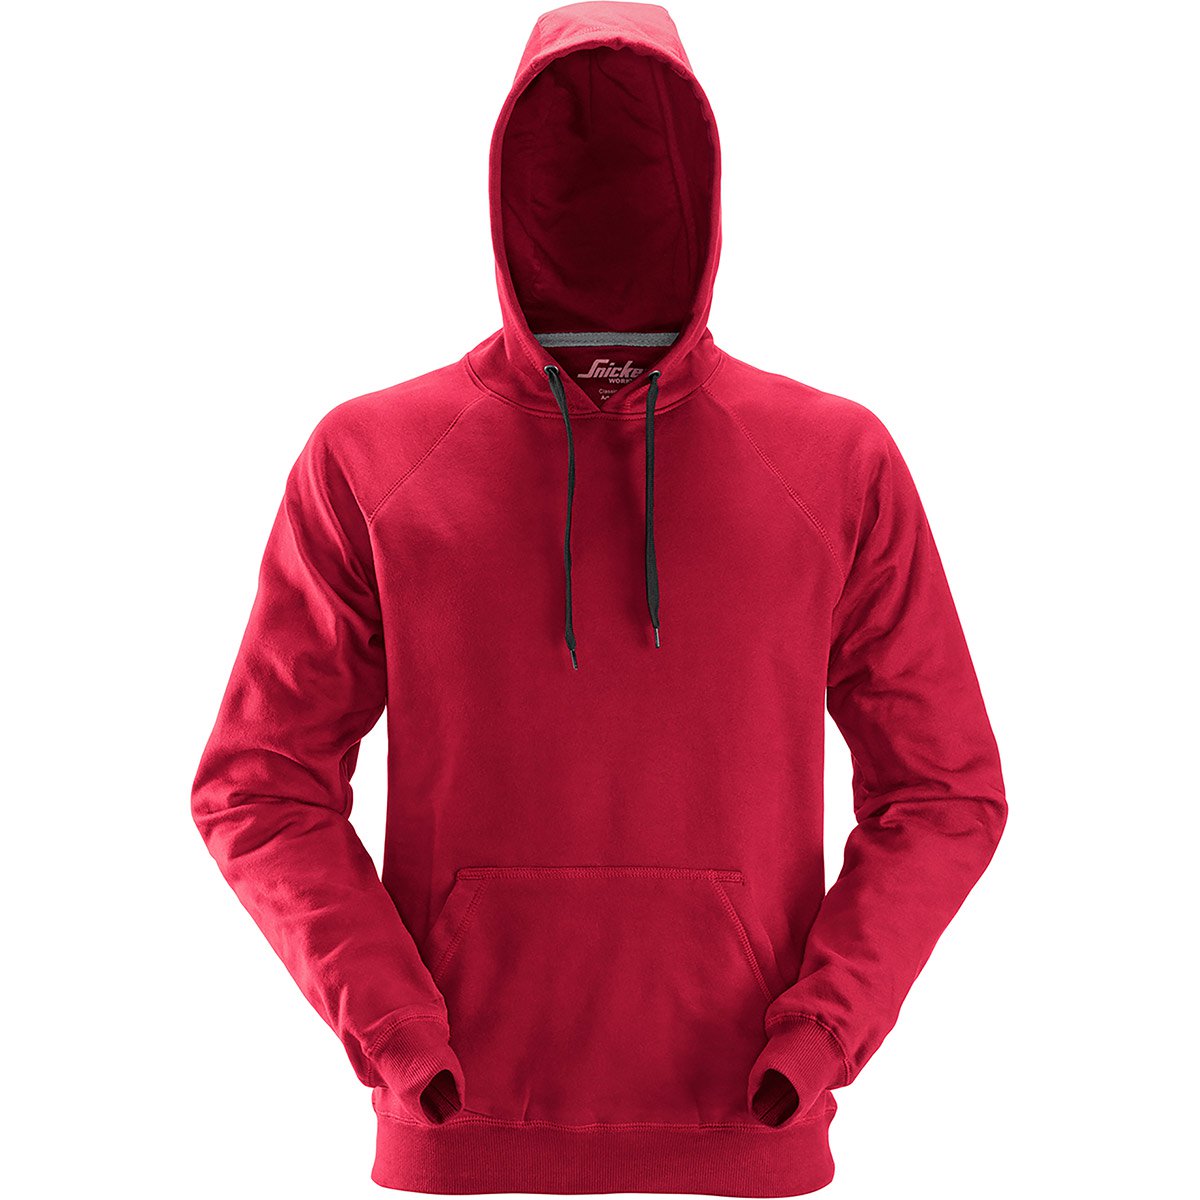 Snickers 2800 Classic Hoodie, Chilli Red, Size XS